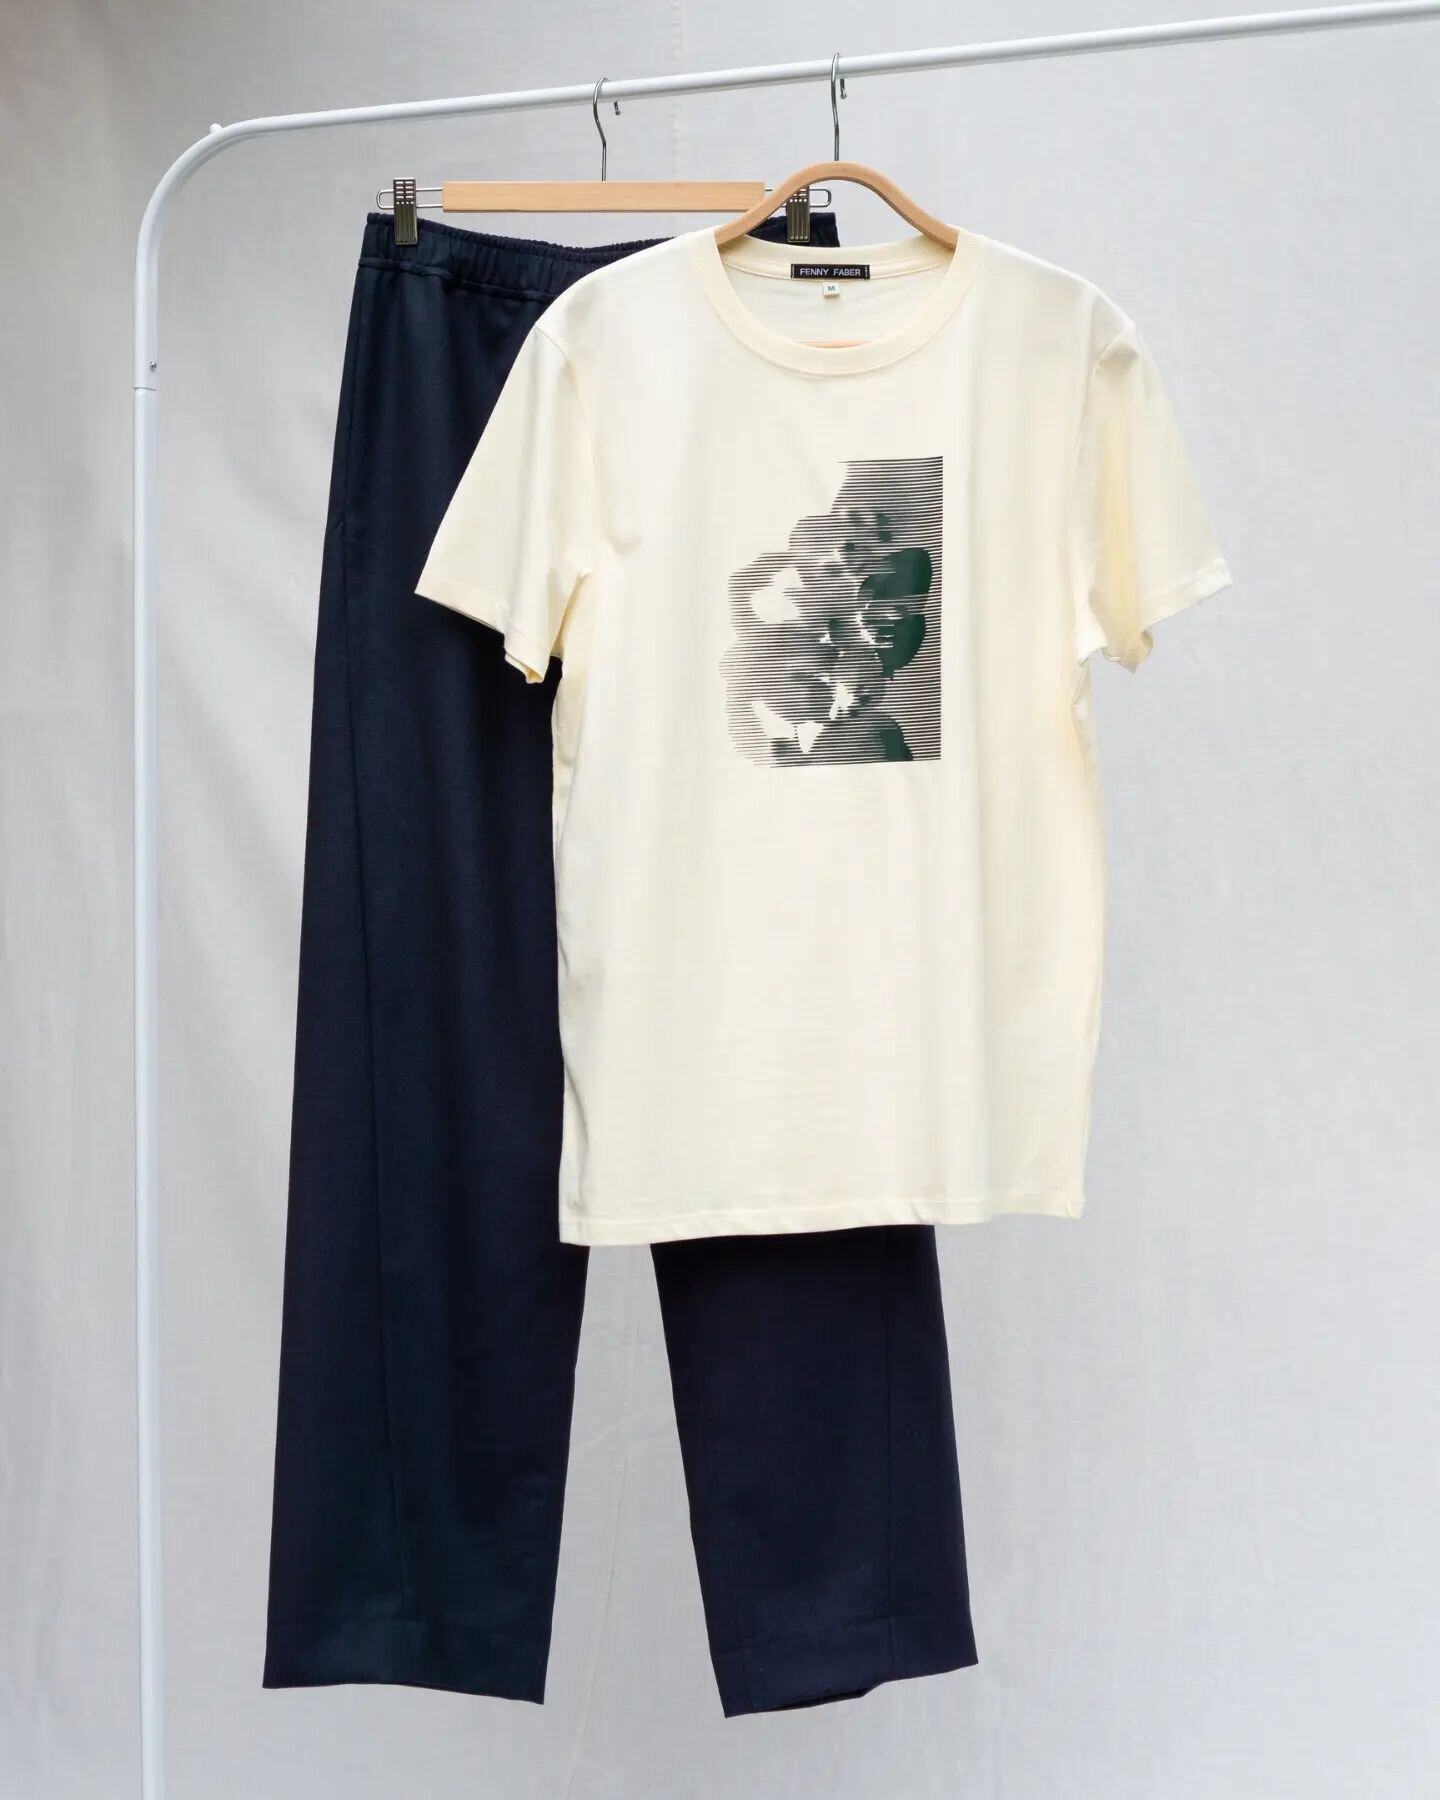 Get ready to embrace a cool and athletic style with this combo! The printed unisex t-shirt perfectly complements the woolen pants with twisted seams, inspired by the fit of oldskool track pants. ⁠
⁠
⁠
⁠
#slowfashionbrand #minimalfashion #fennyfaber #